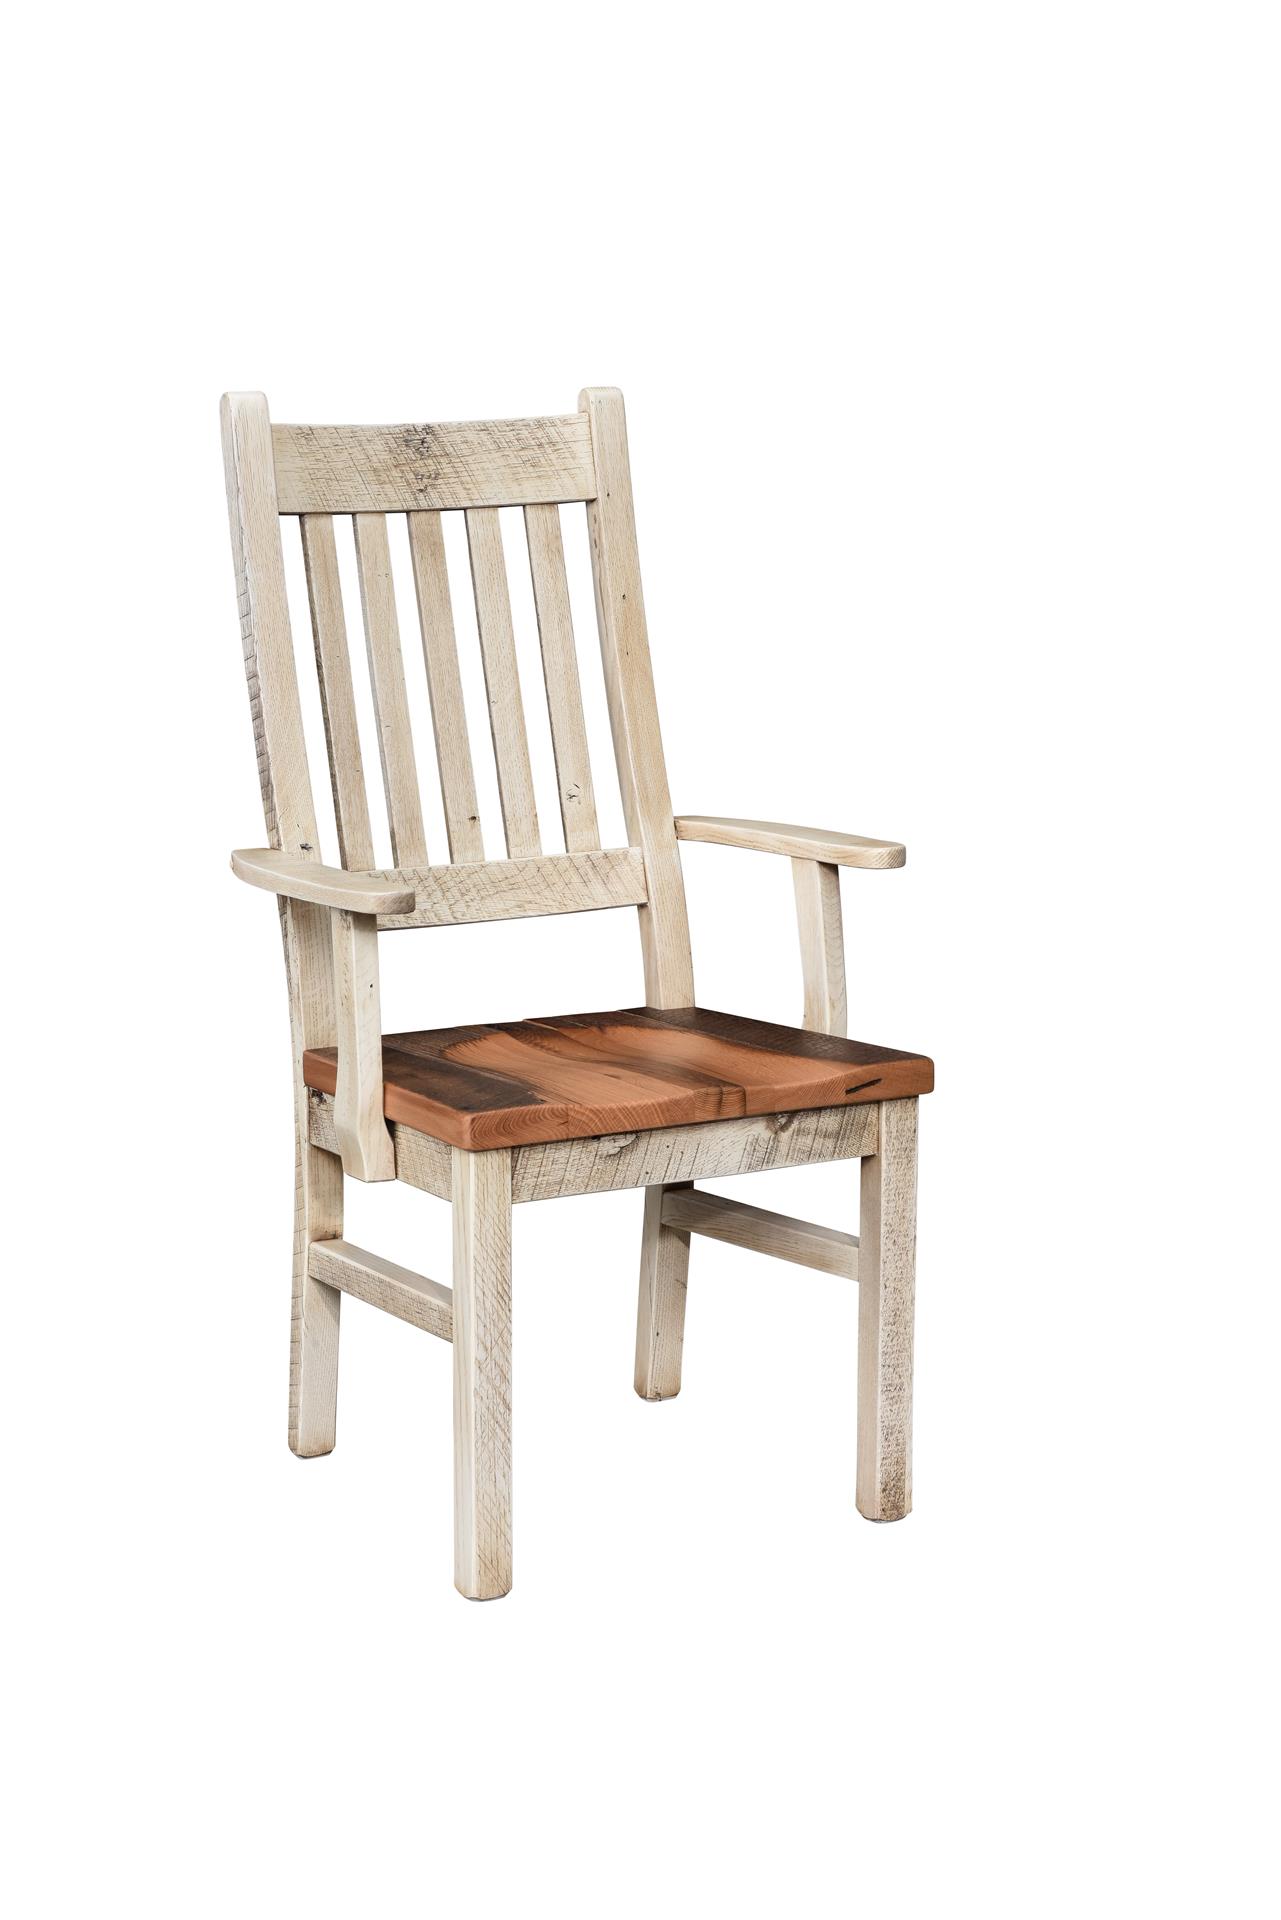 Barnwood Chairs Ma Pa S, What Do You Call A Chair Without Arms